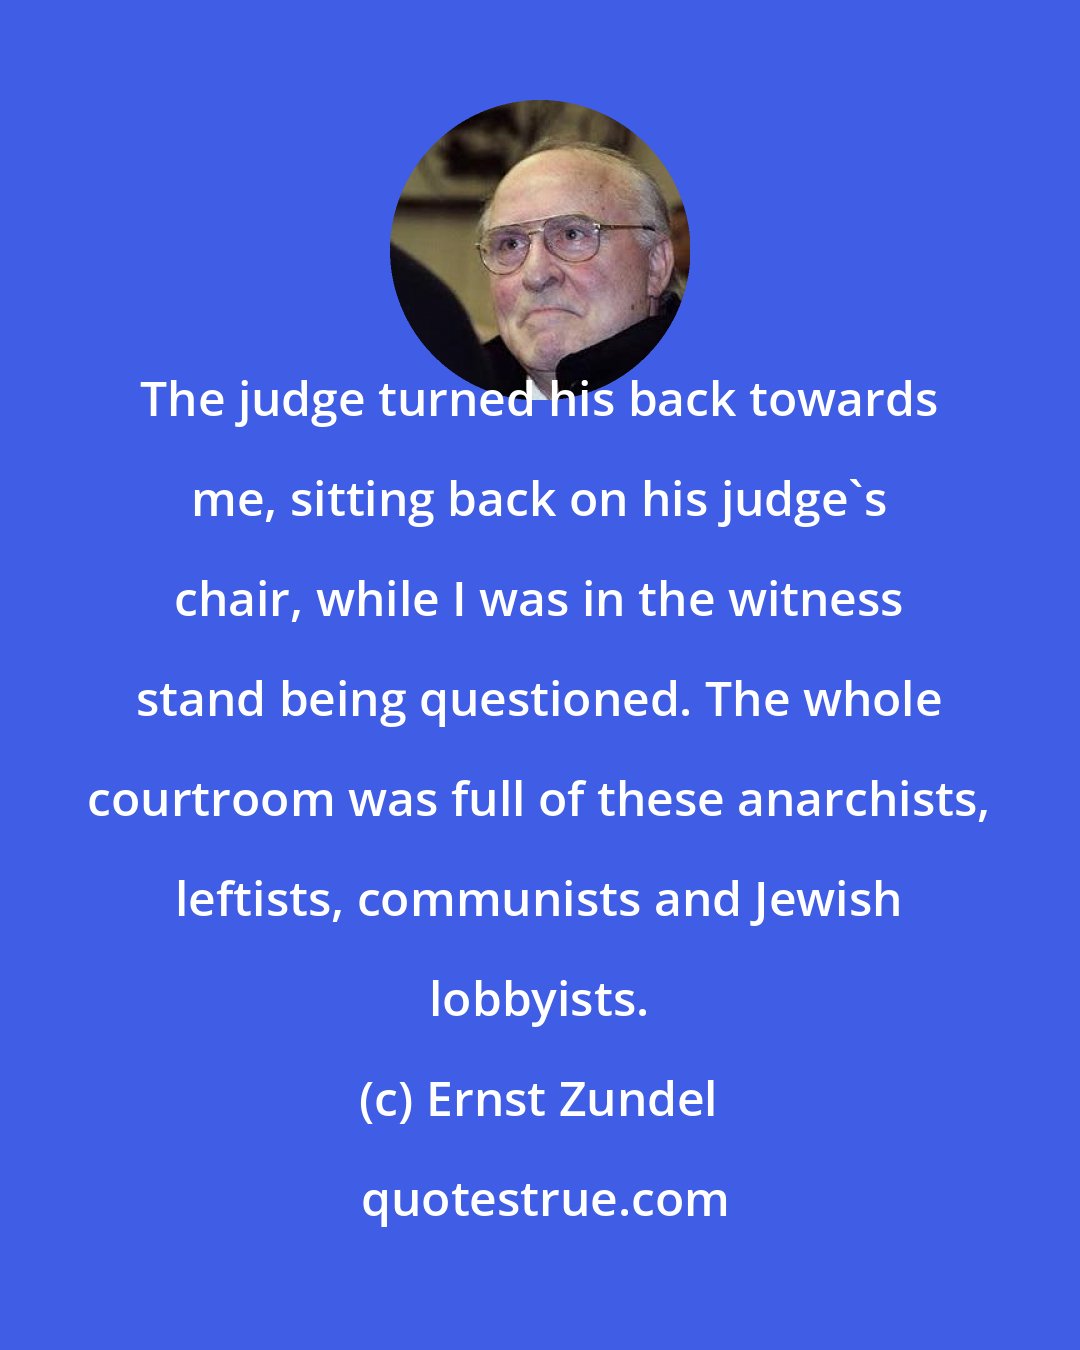 Ernst Zundel: The judge turned his back towards me, sitting back on his judge's chair, while I was in the witness stand being questioned. The whole courtroom was full of these anarchists, leftists, communists and Jewish lobbyists.